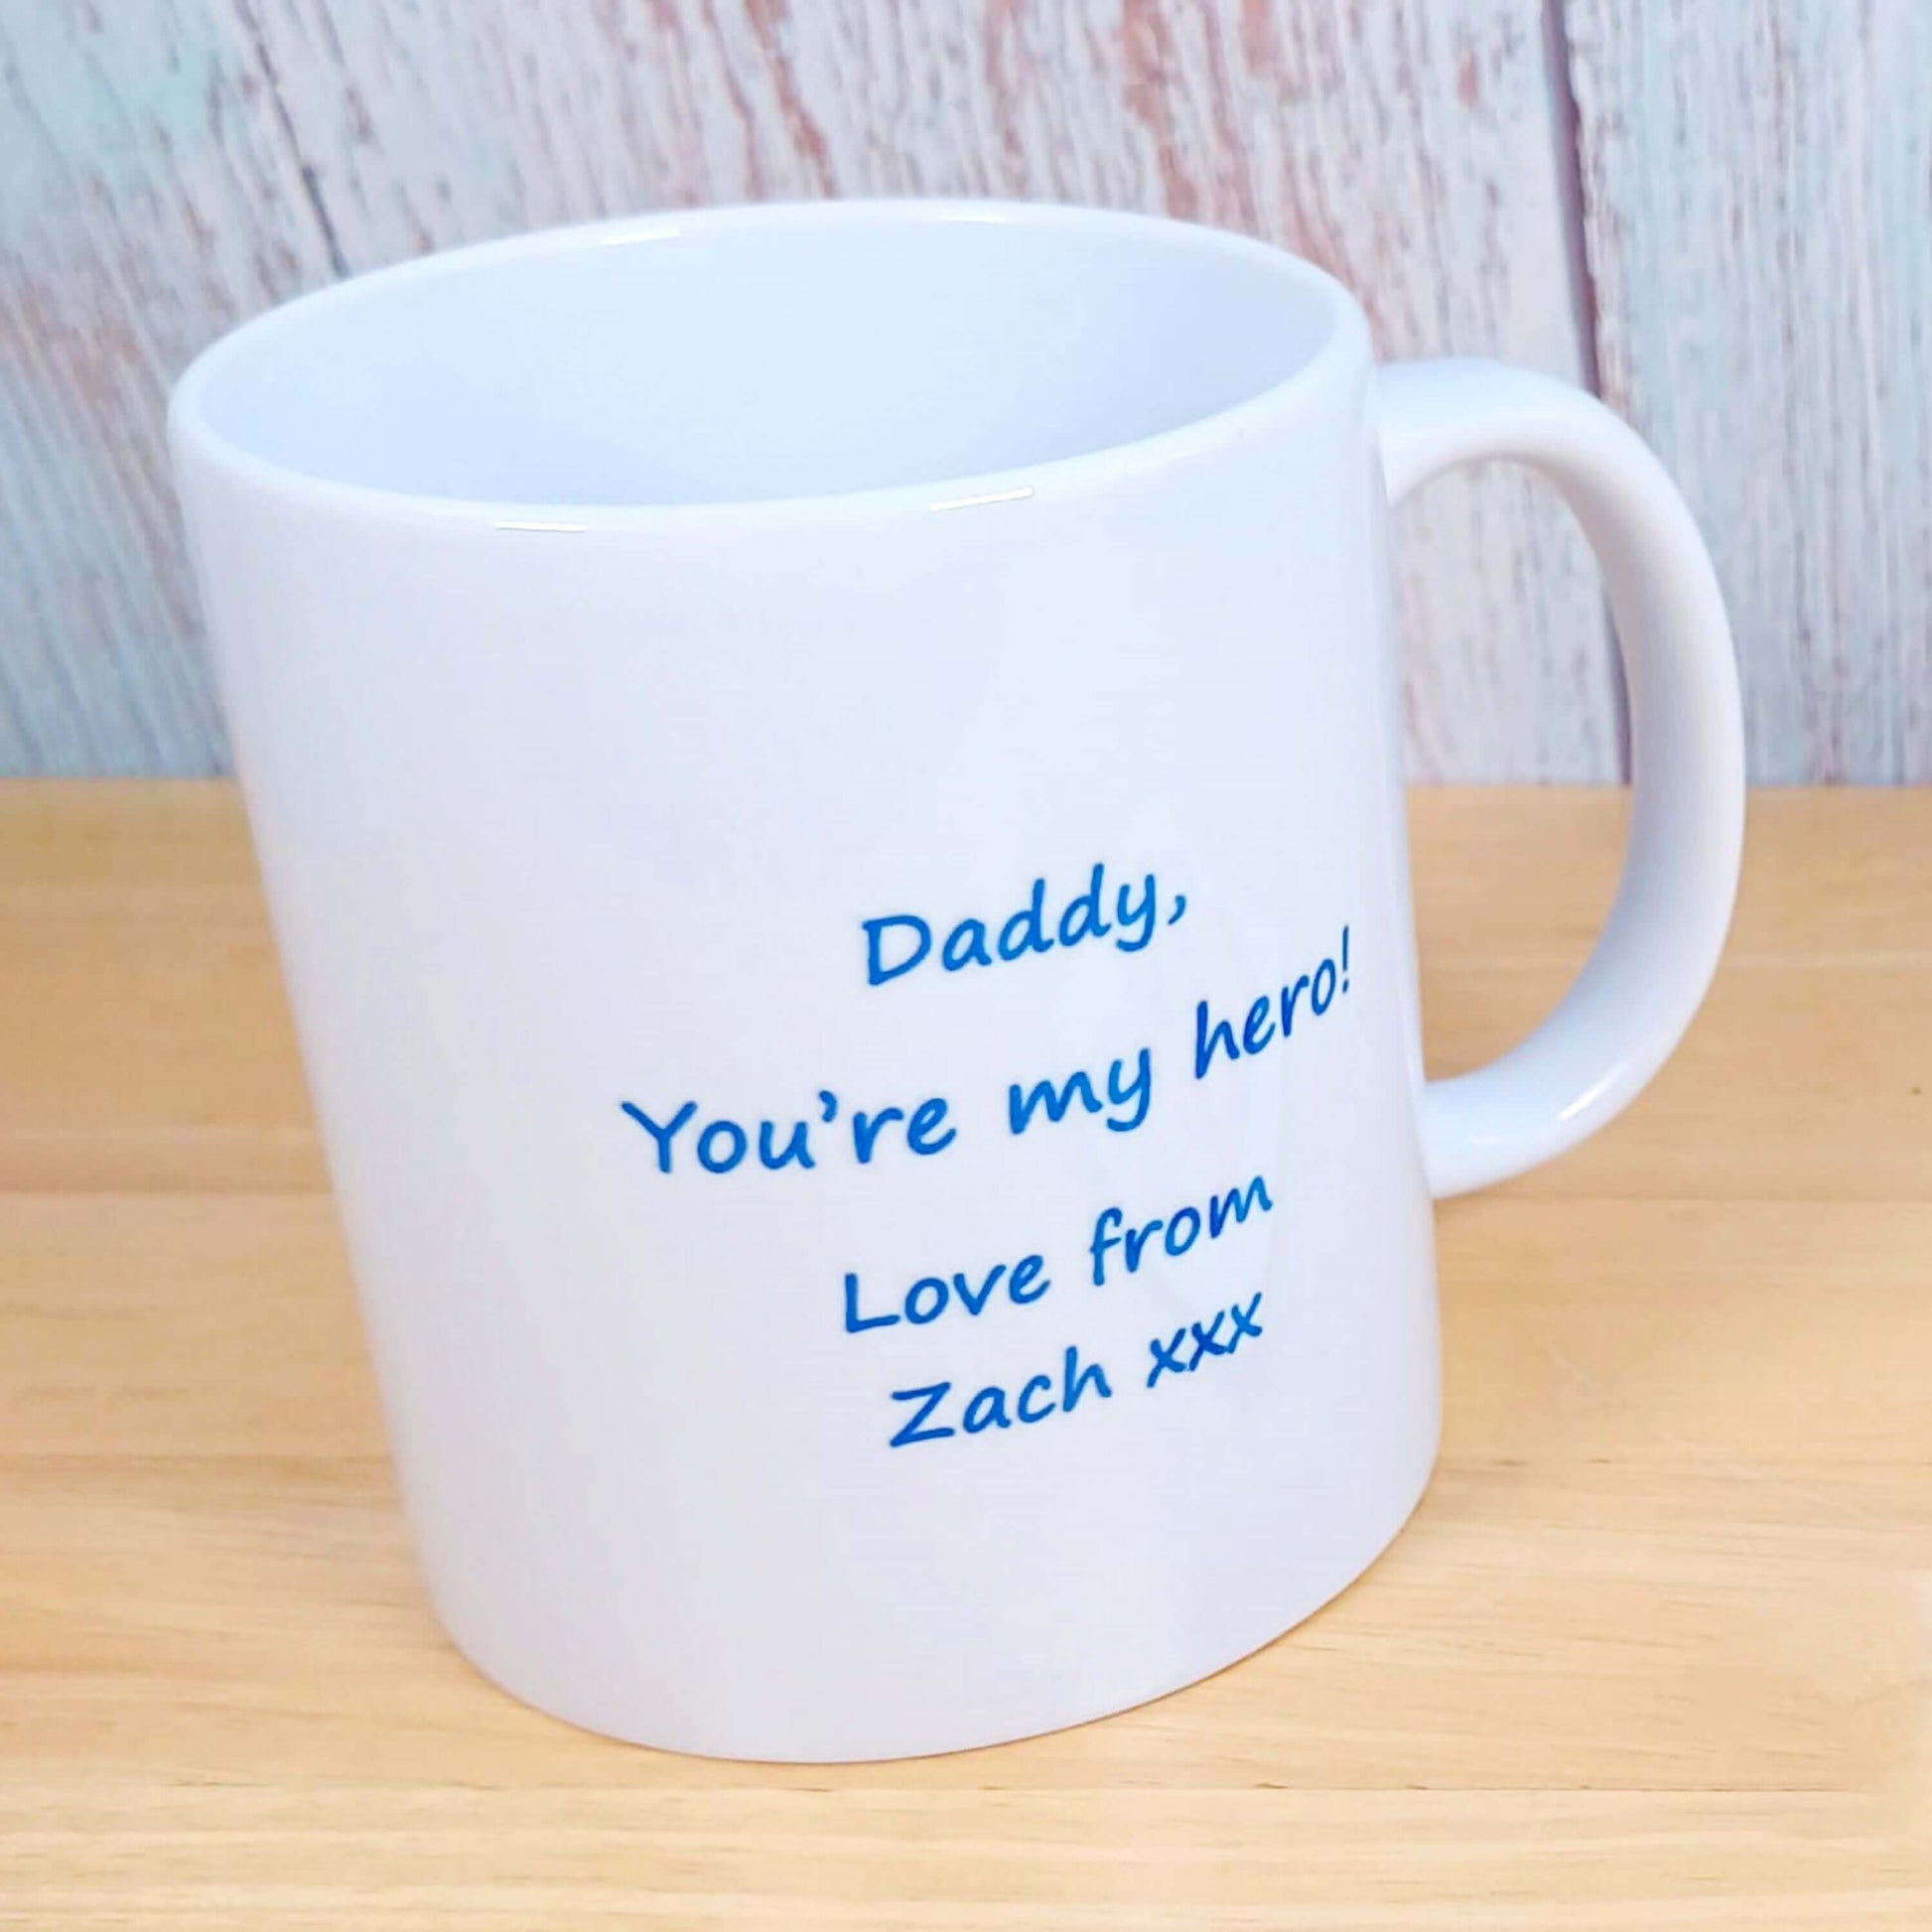 Birthday or Father's Day Gifts for Dad - Personalised message on reverse side of mug shown in this image. Reverse side has SuperDad themed design. White ceramic coffee mug with red and yellow Superman Logo design and blue wording " Dad " intertwined under